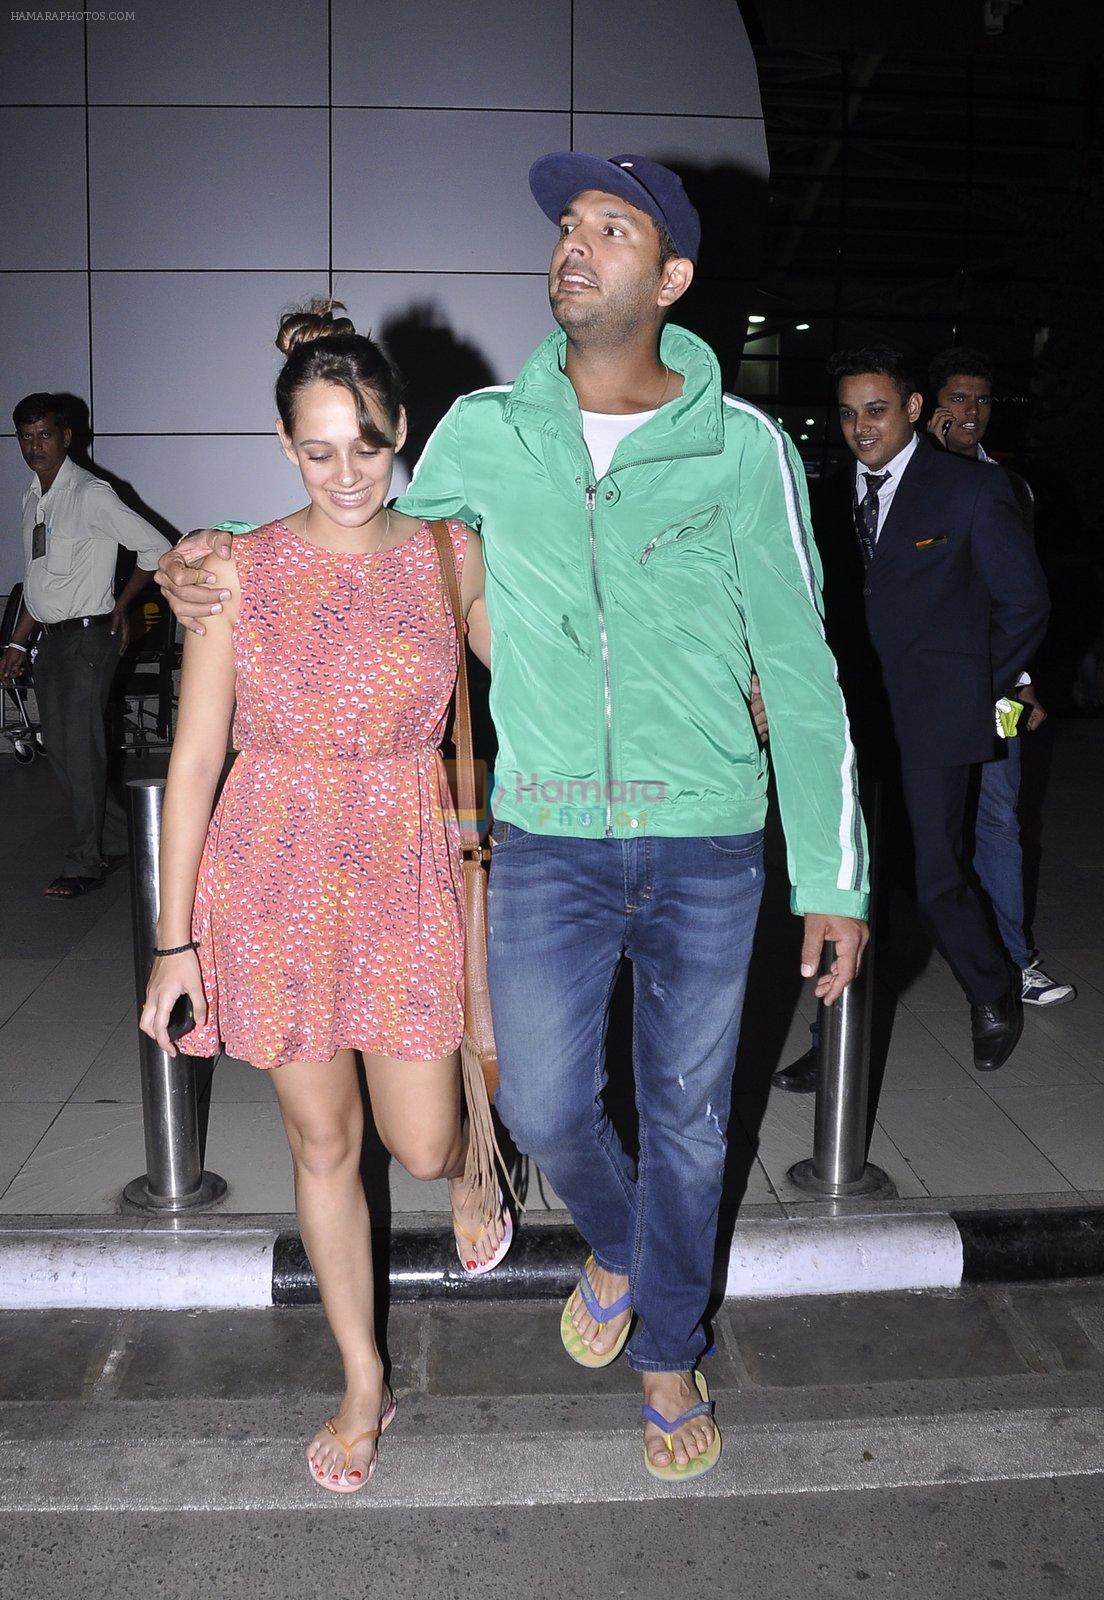 Yuvraj Singh and Hazel Keech post their engagement snapped at the airport on 17th Nov 2015